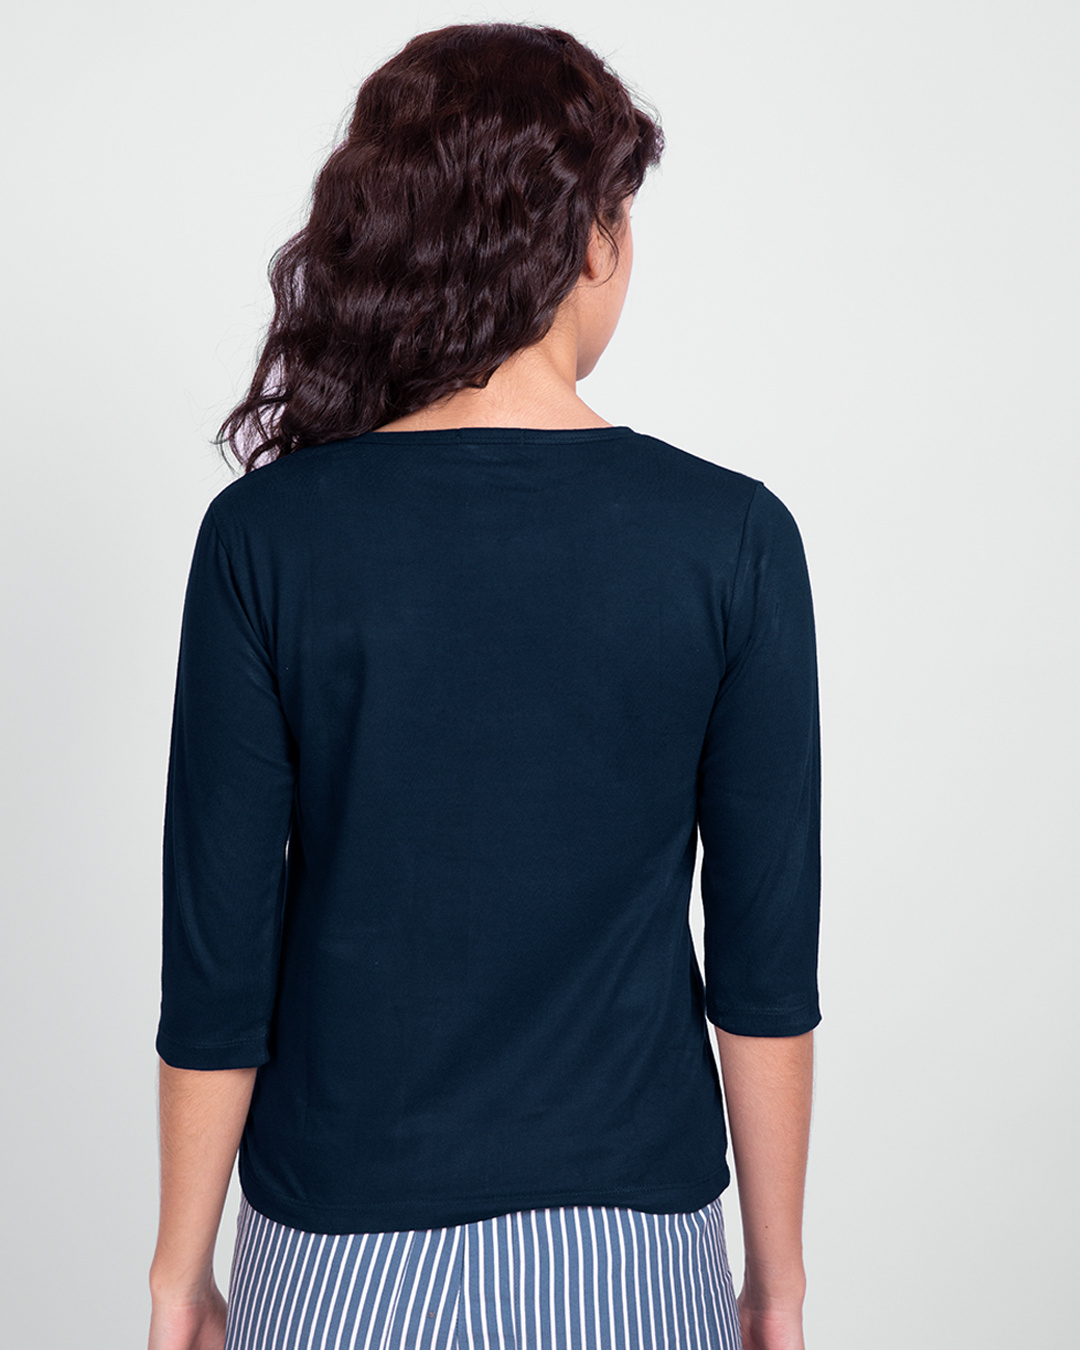 Shop All We Have Women's Round Neck 3/4 Sleeve T-shirt-Back